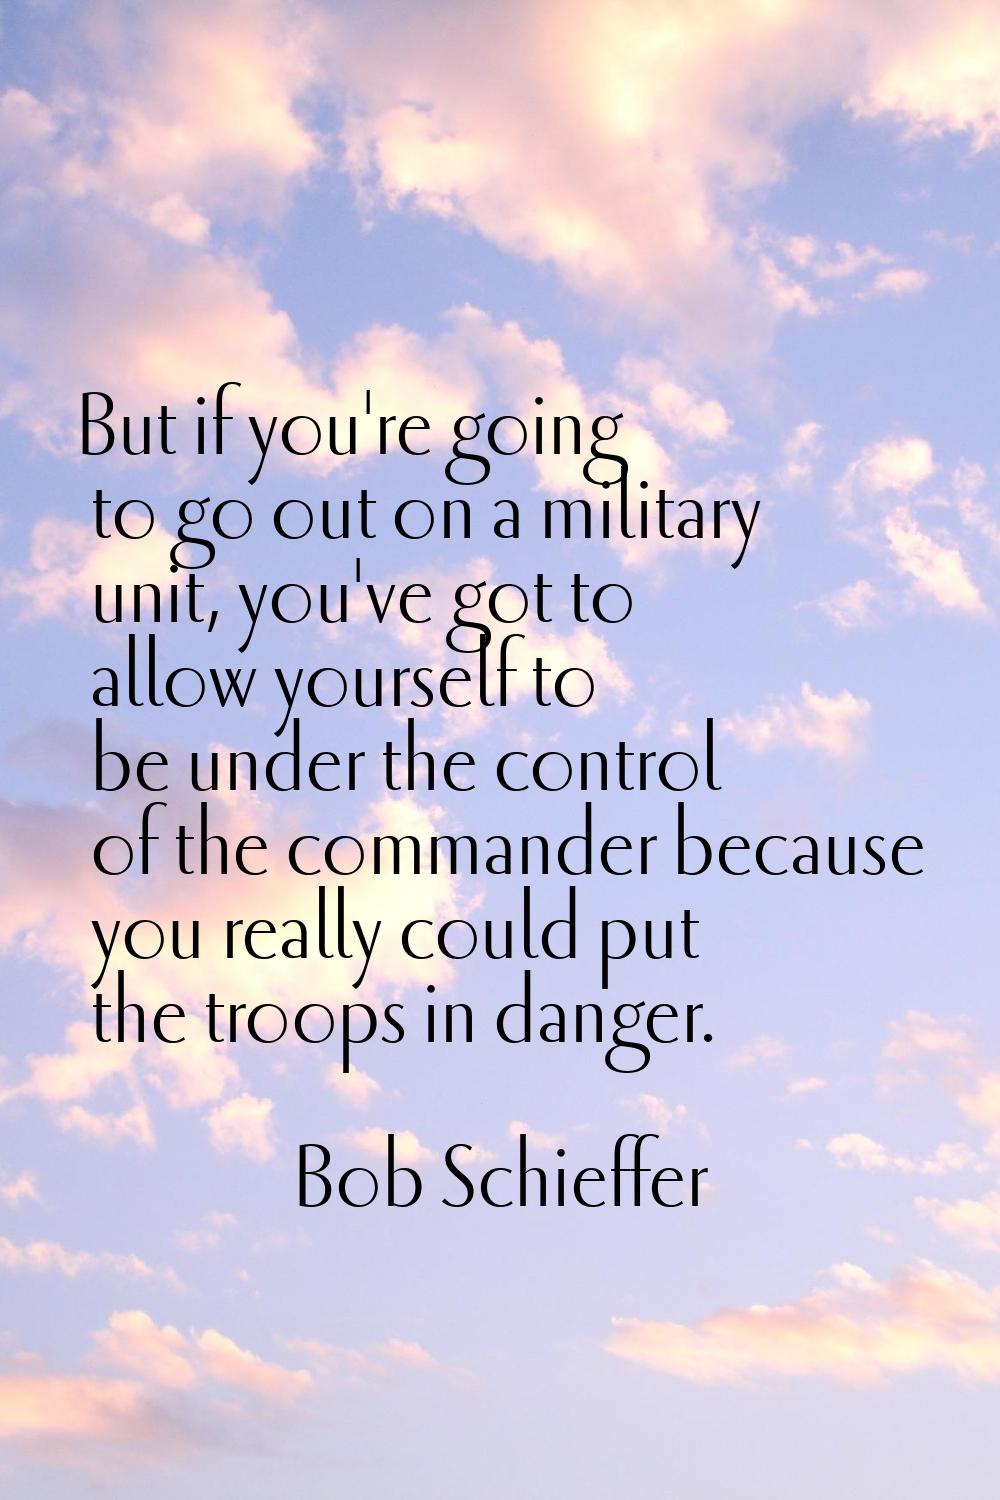 But if you're going to go out on a military unit, you've got to allow yourself to be under the cont